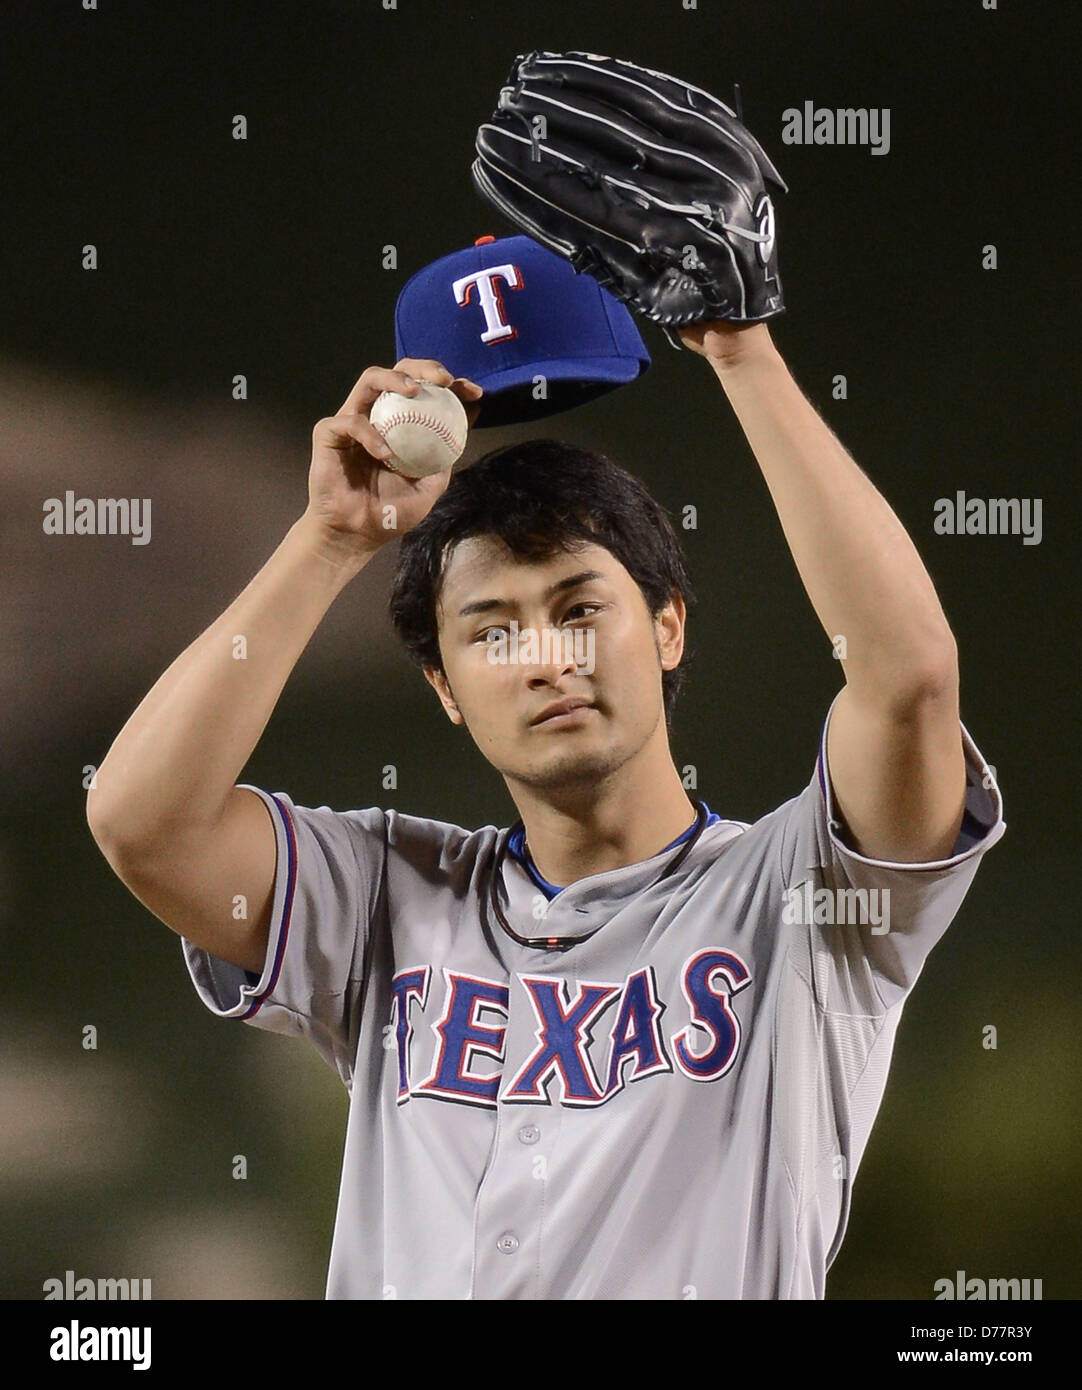 Pitcher Yu Darvish of the Texas Rangers stands on the mound at